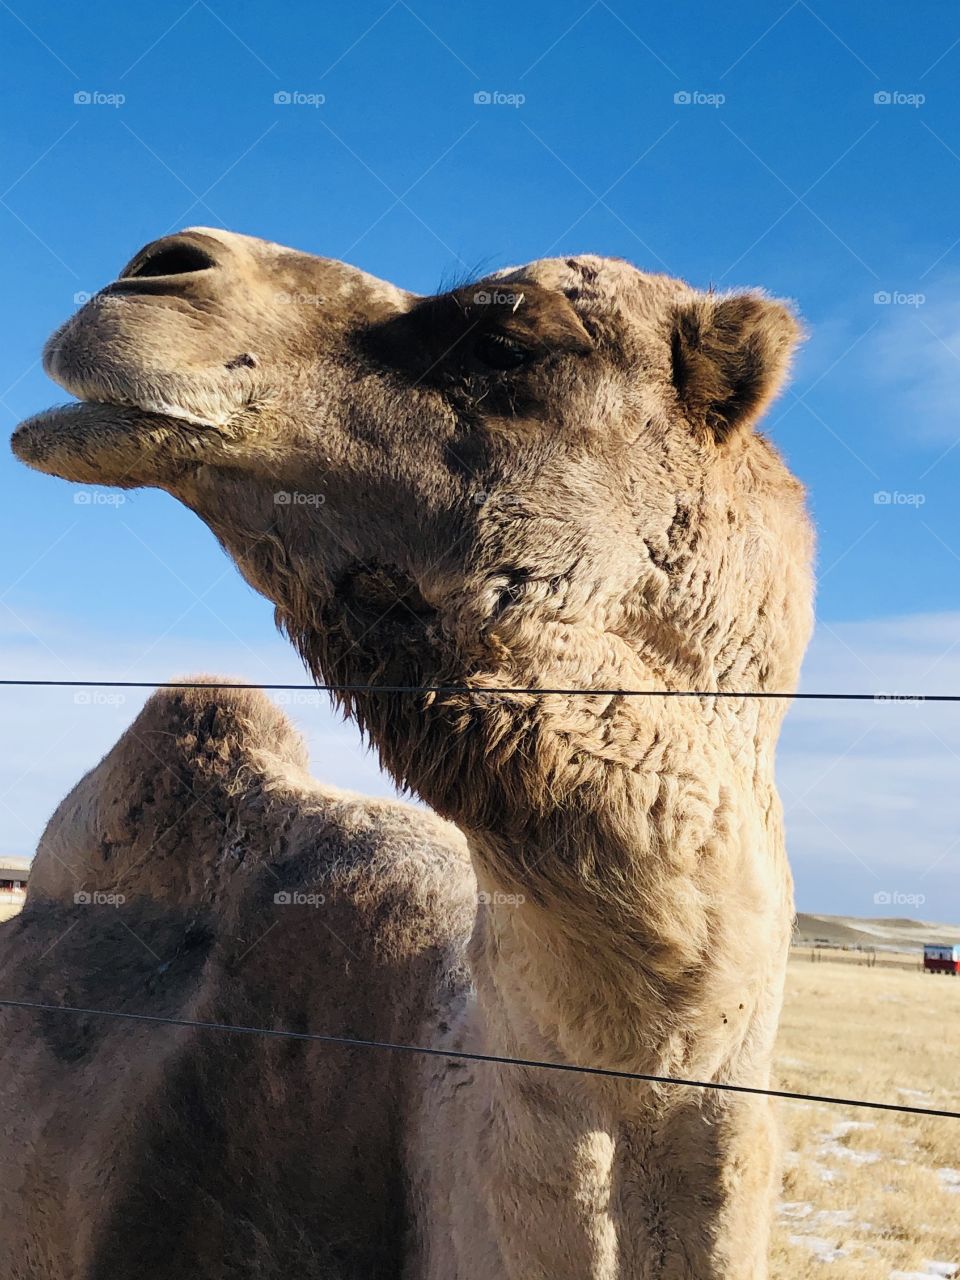 This camel shows off her best side for a photo.